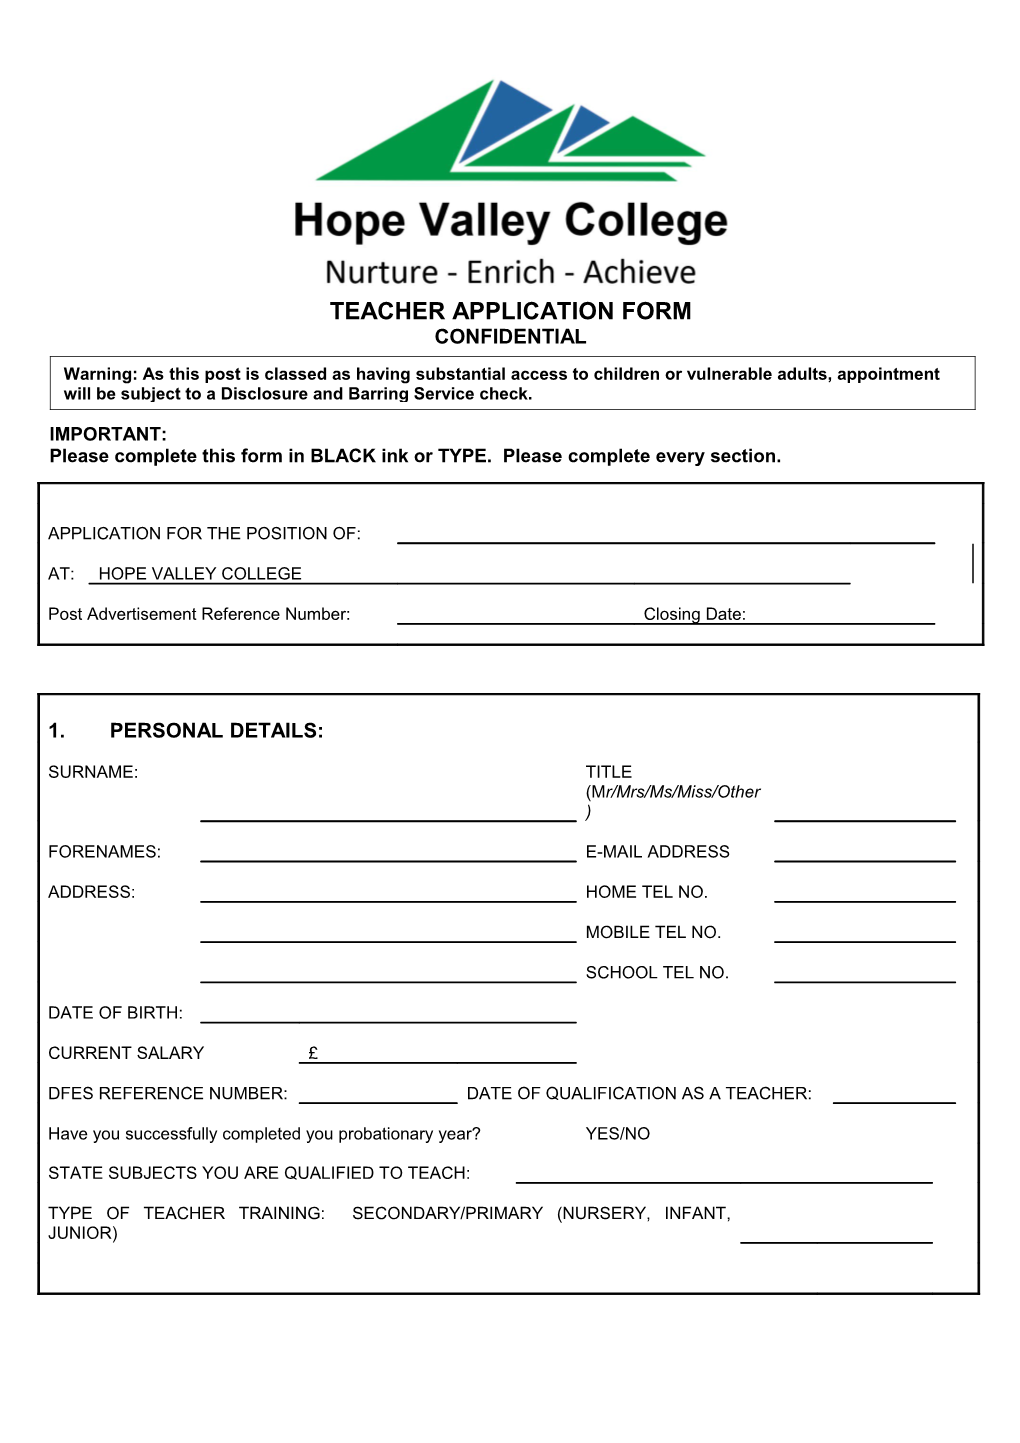 Please Complete This Form in BLACK Ink Or TYPE. Please Complete Every Section